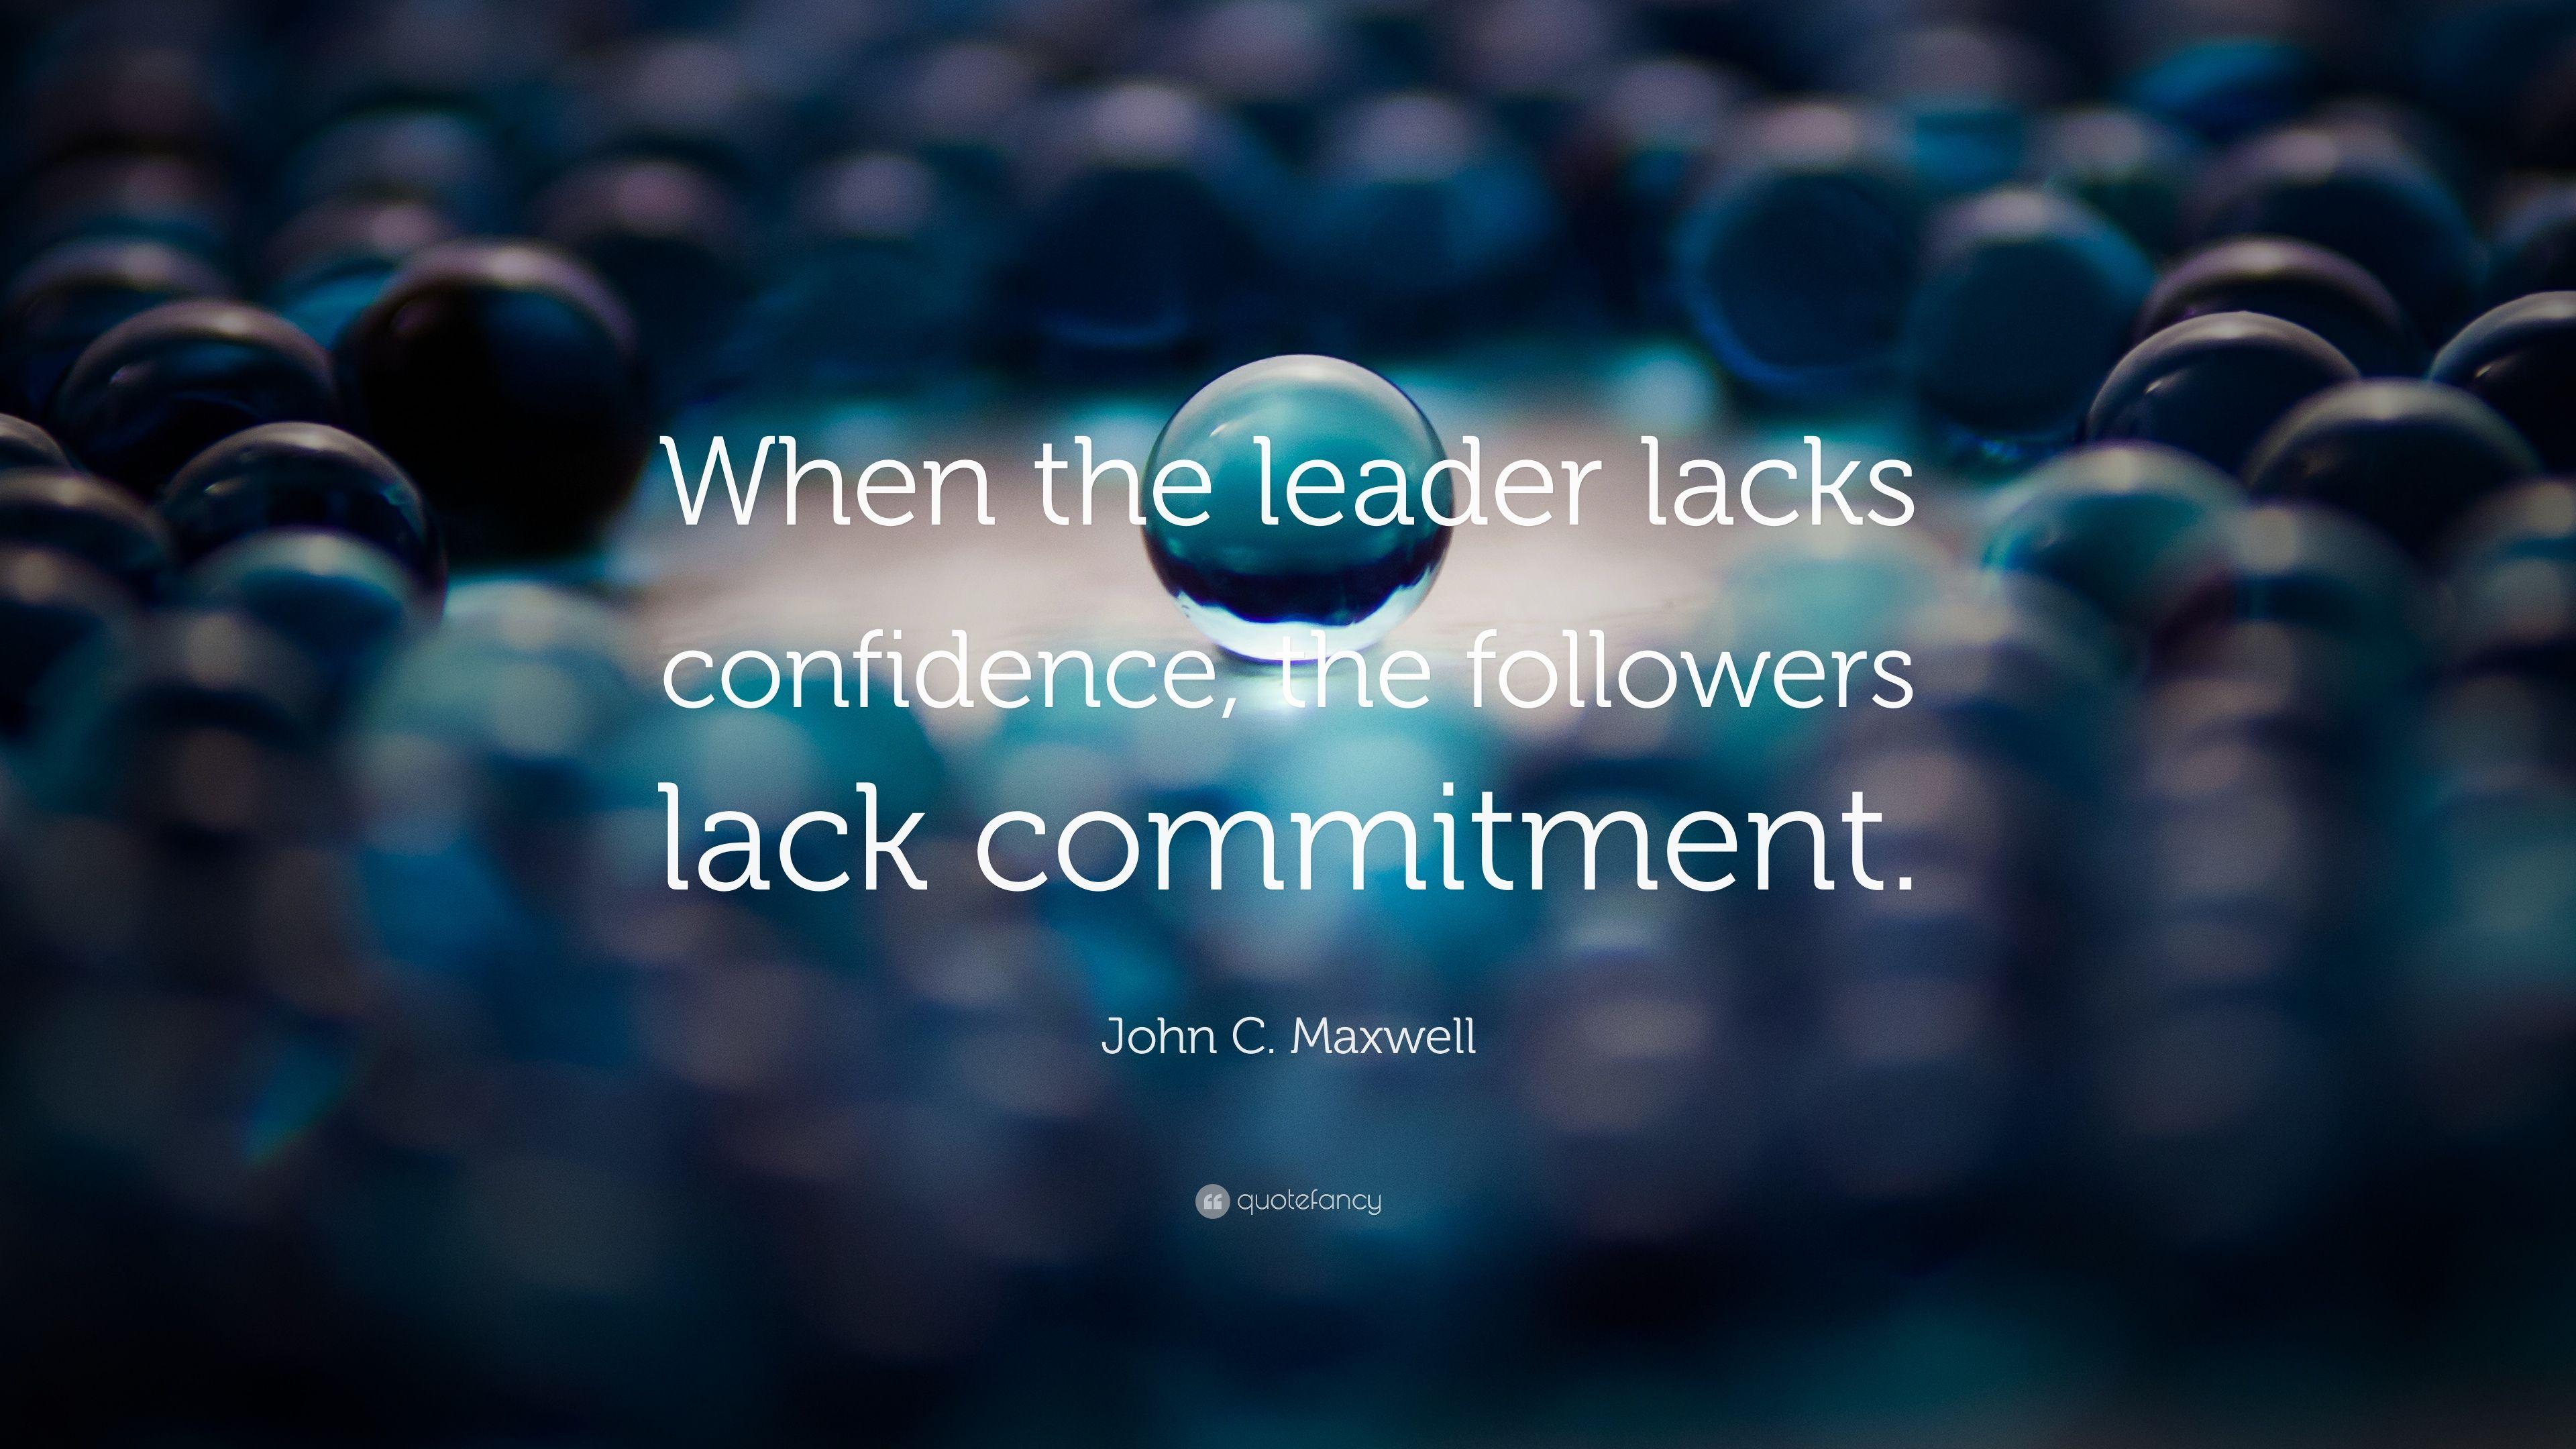 John C. Maxwell Quote: “When the leader lacks confidence